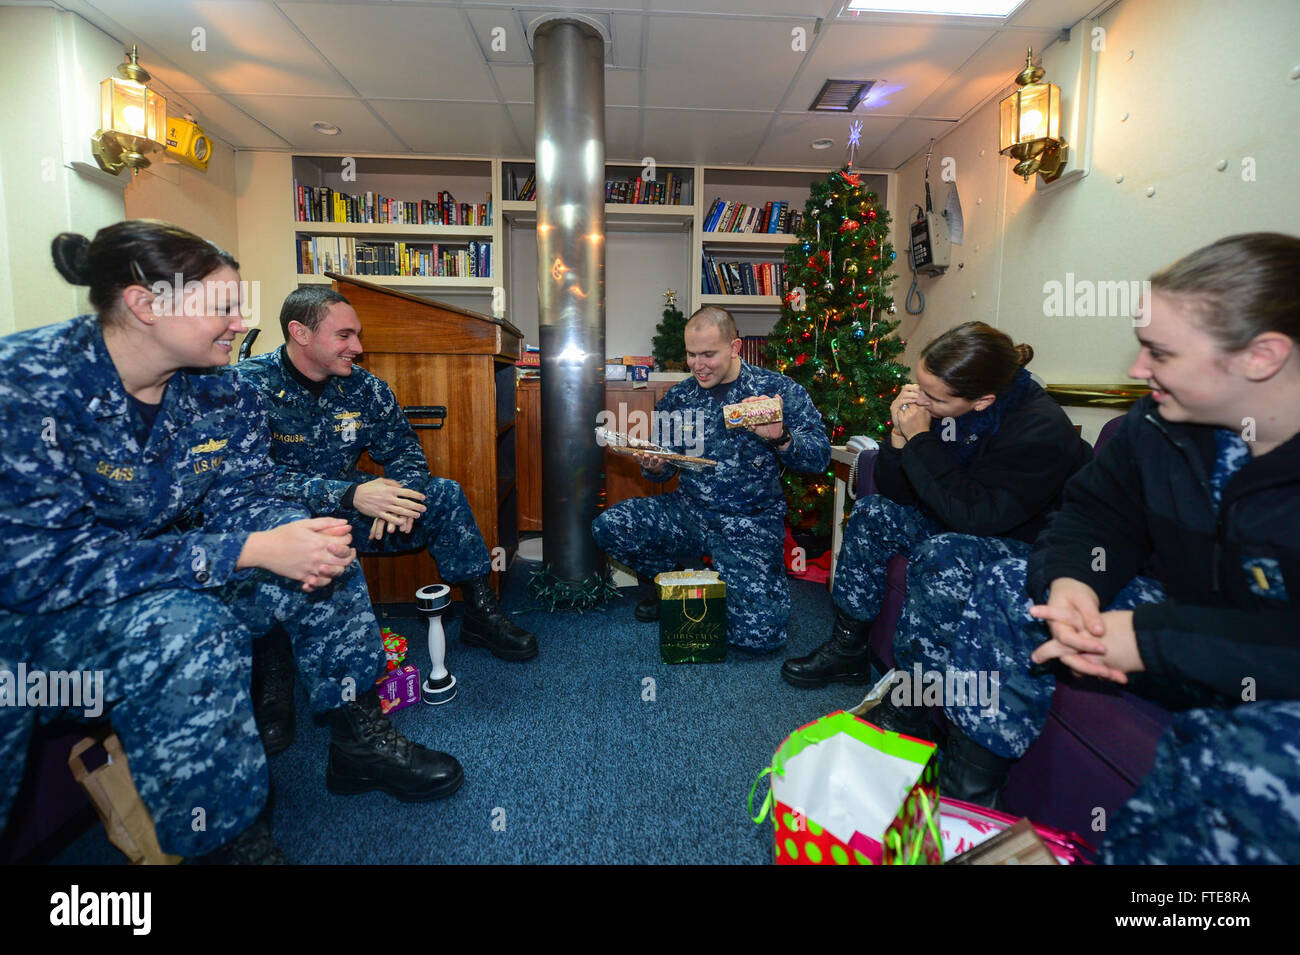 131224-N-QL471-126 FUNCHAL, Portugal (Dec. 24, 2013) Lt. j.g. Timothy Davey, navigator aboard the guided-missile cruiser USS Monterey (CG 61), hands out Christmas gifts in the ship's wardroom as the ship is moored in Funchal, Portugal for a port visit. Monterey is deployed in support of maritime security operations and theater security cooperation efforts in the U.S. 6th Fleet area of operations. (U.S. Navy photo by Mass Communication Specialist 2nd Class Billy Ho/Released) Stock Photo